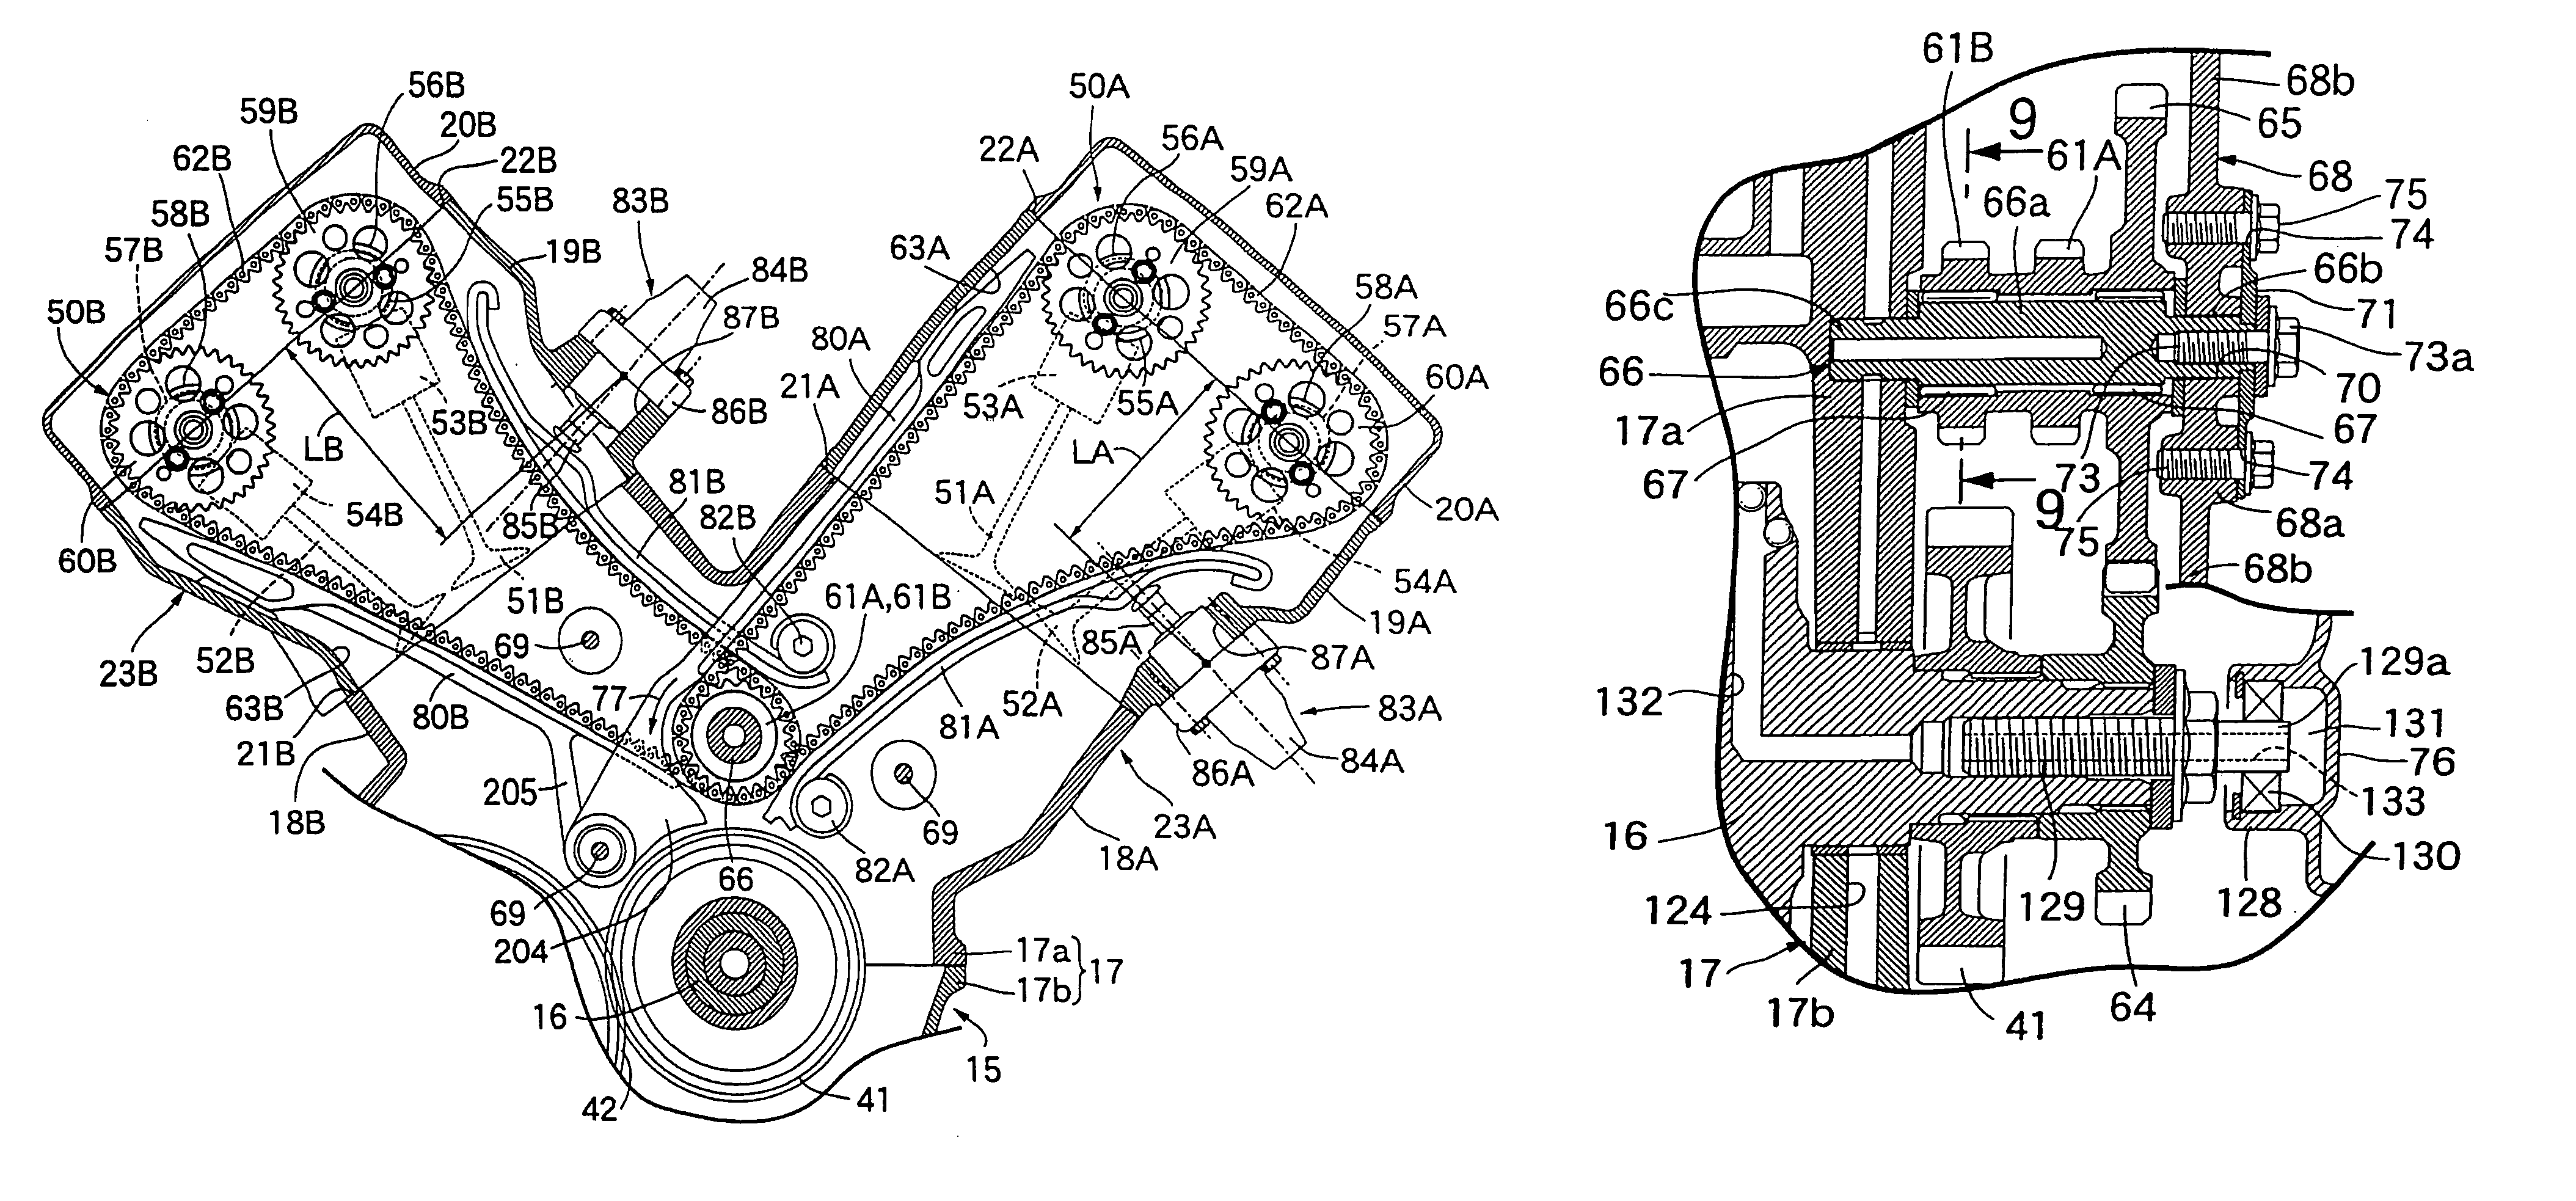 Cam drive gear and valve operating system drive gear for engine